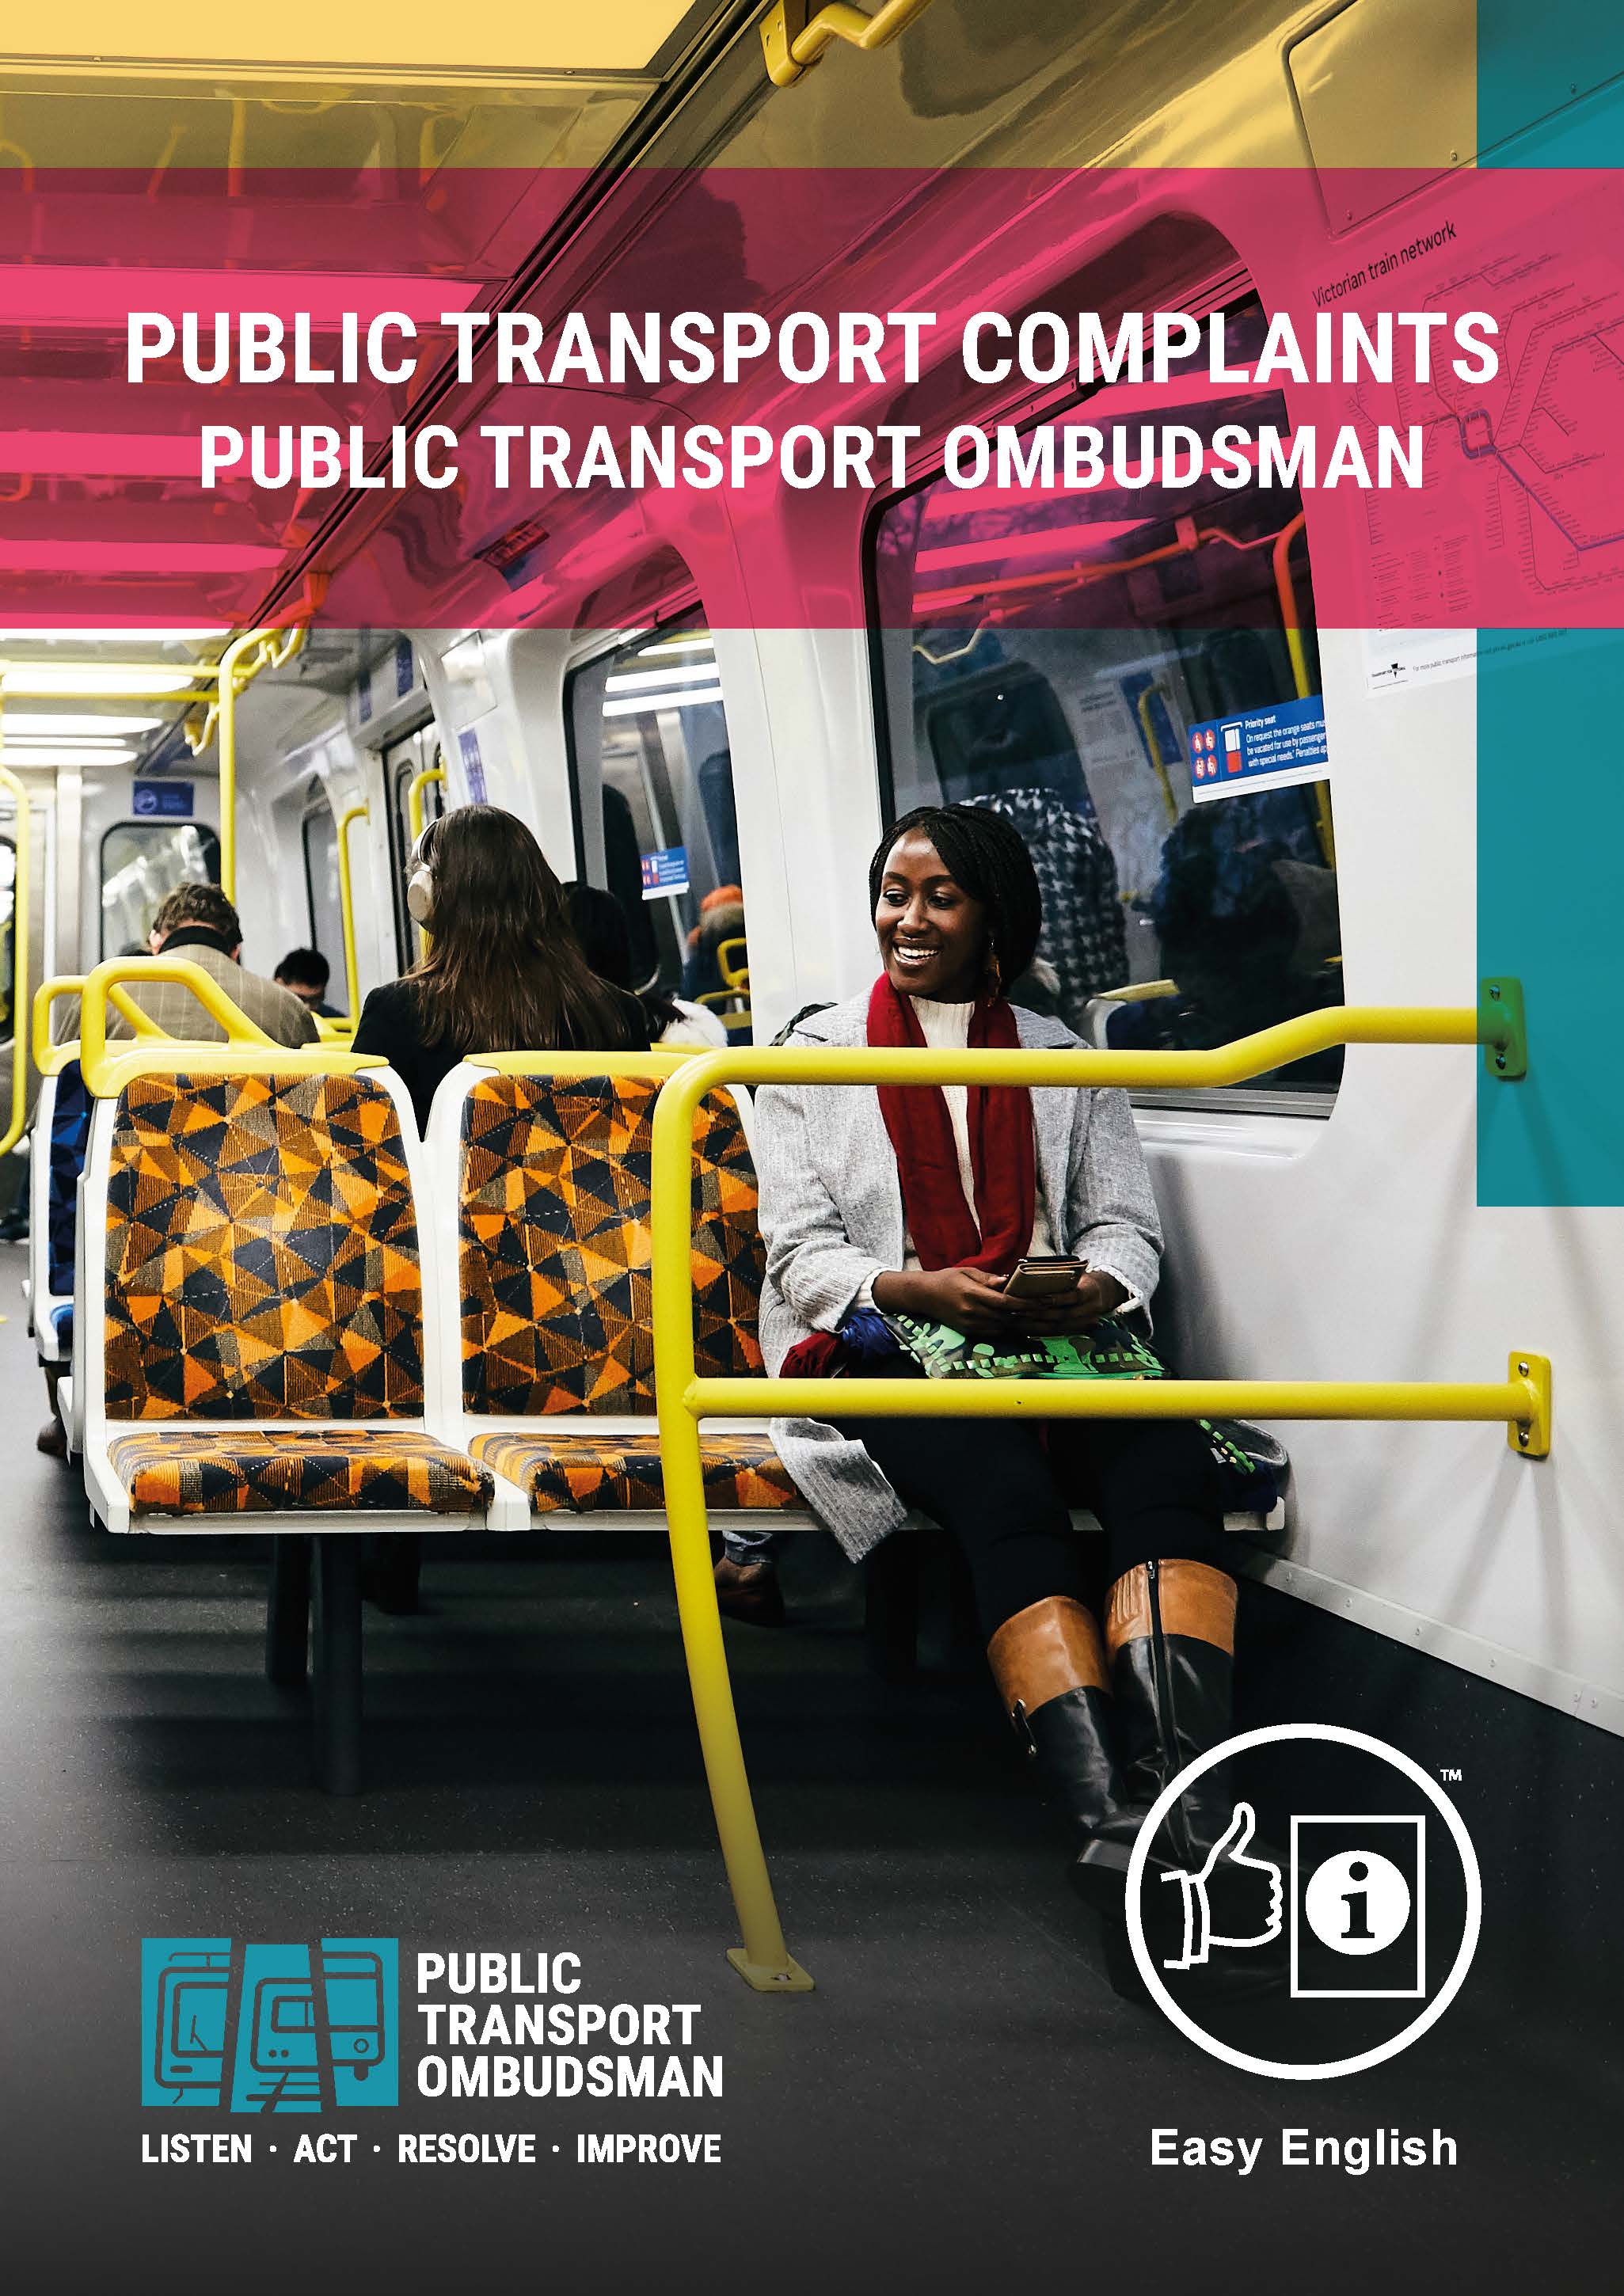 Image shows the cover of the Public Transport Ombudsman Easy English Information Brochure. It features a photograph of a woman sitting on a train. There is a green and black handbag sitting on her lap and she is holding a mobile phone before her. She has dark coloured skin and is looking to her right and smiling. Her hair is woven into braids, and she is wearing large gold earrings, a grey jumper, red scarf, black pants, and black and brown leather boots. The first line of the brochure cover title is “Public Transport Complaints”, and the second line is “Public Transport Ombudsman”. At the bottom left of the cover is the Public Transport Ombudsman logo. At the bottom right of the cover is the symbol for Easy English.